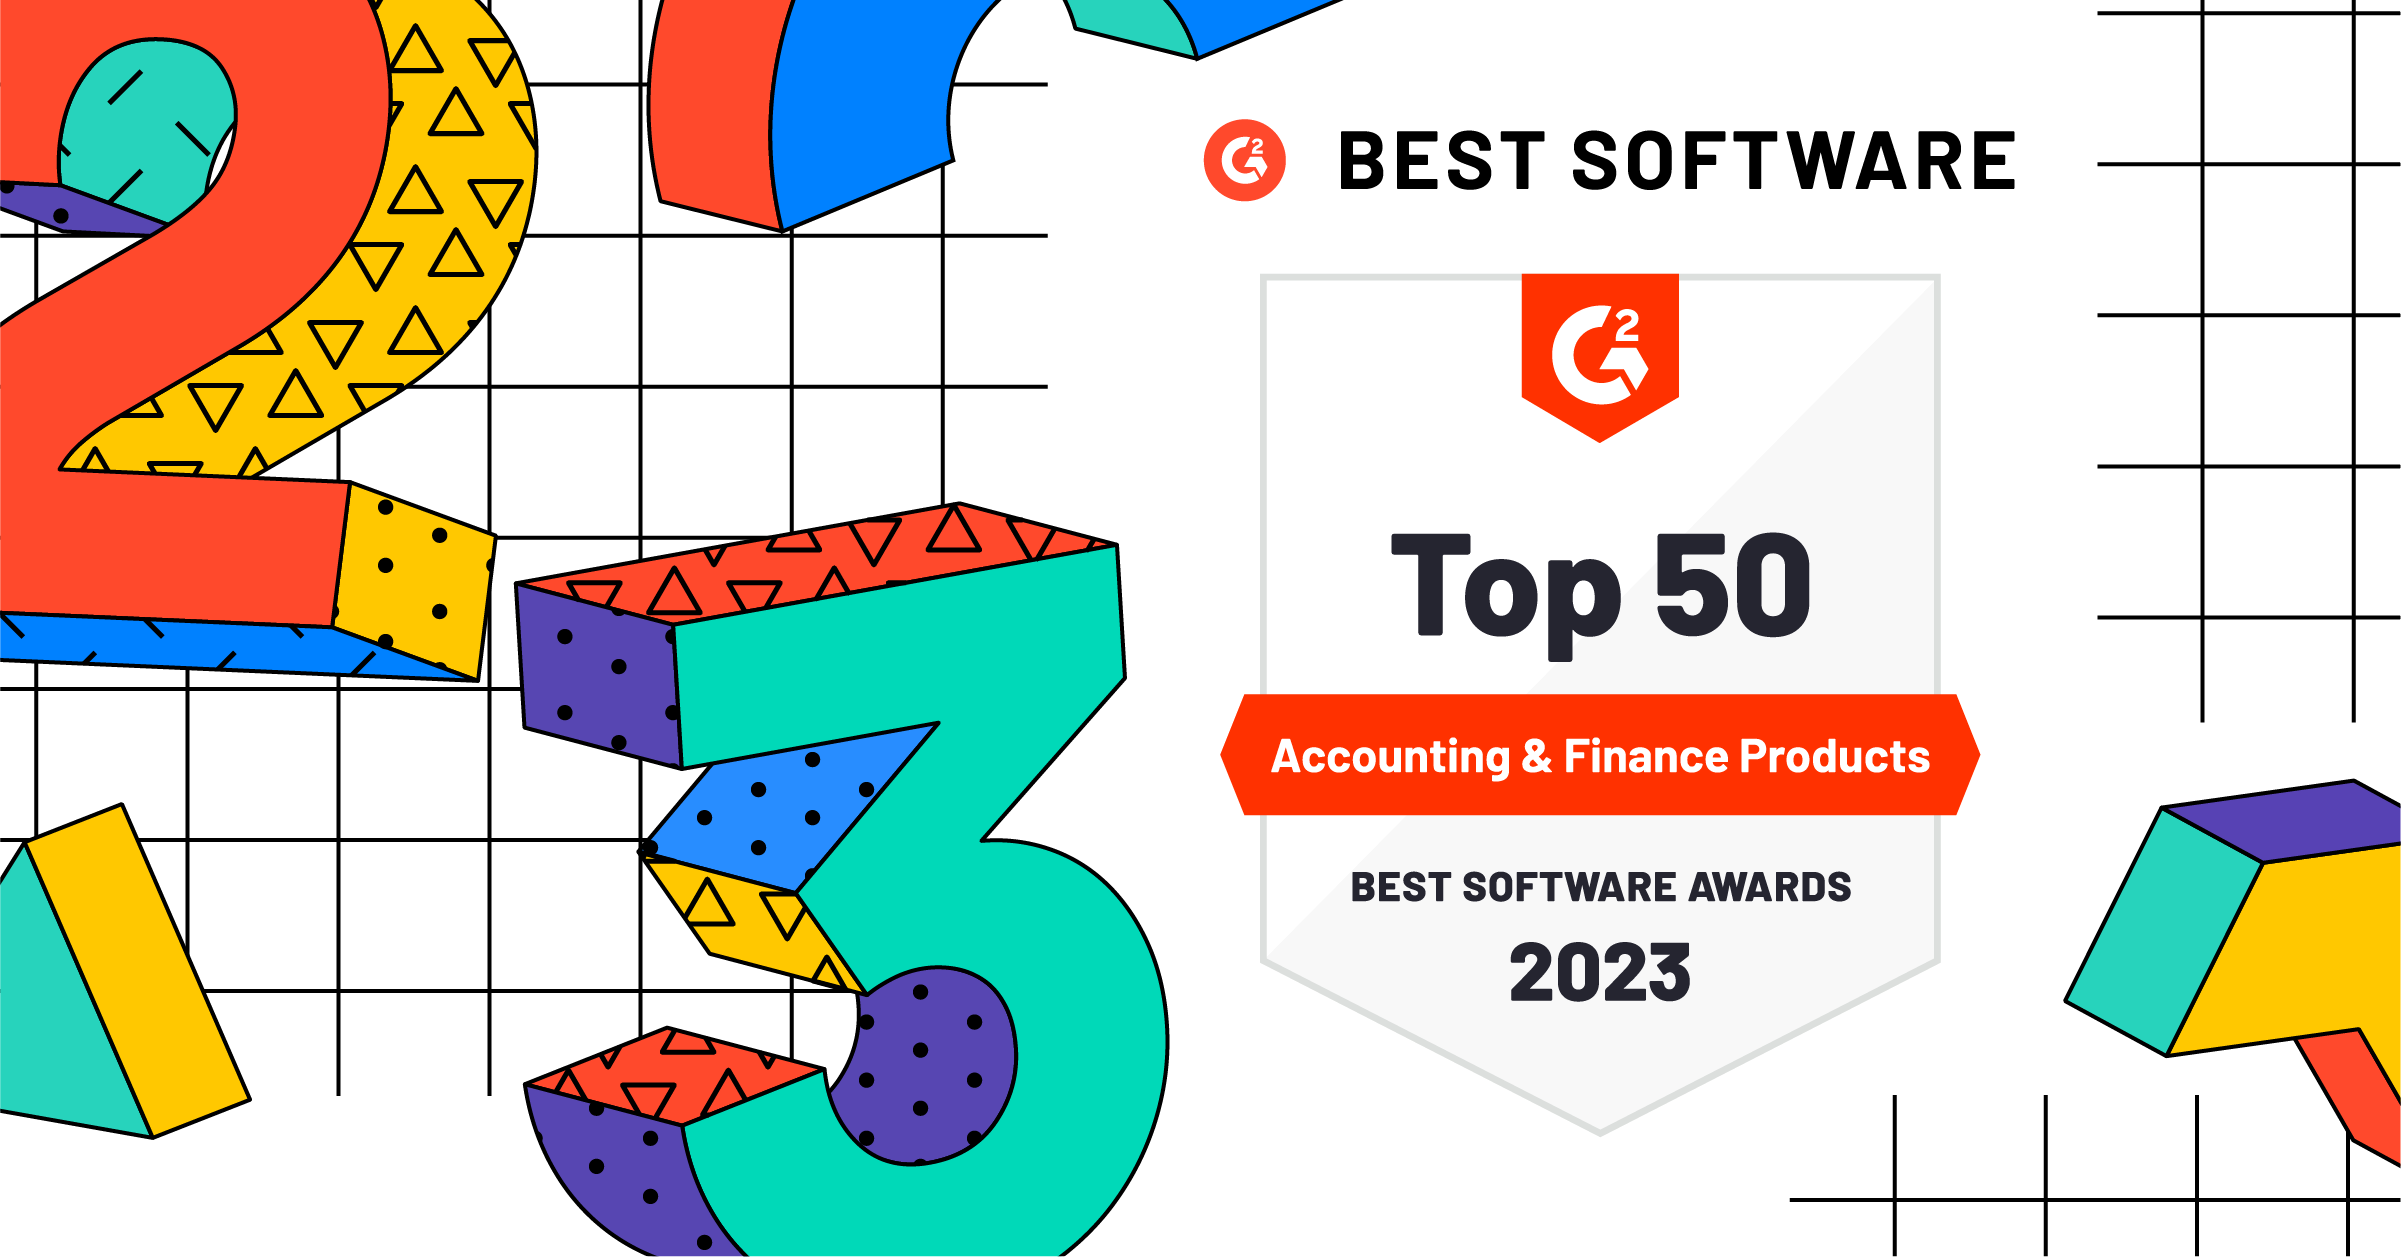 Multiview has been named to G2’s 2023 Best Software Awards, placing 12th on the Accounting and Finance list.